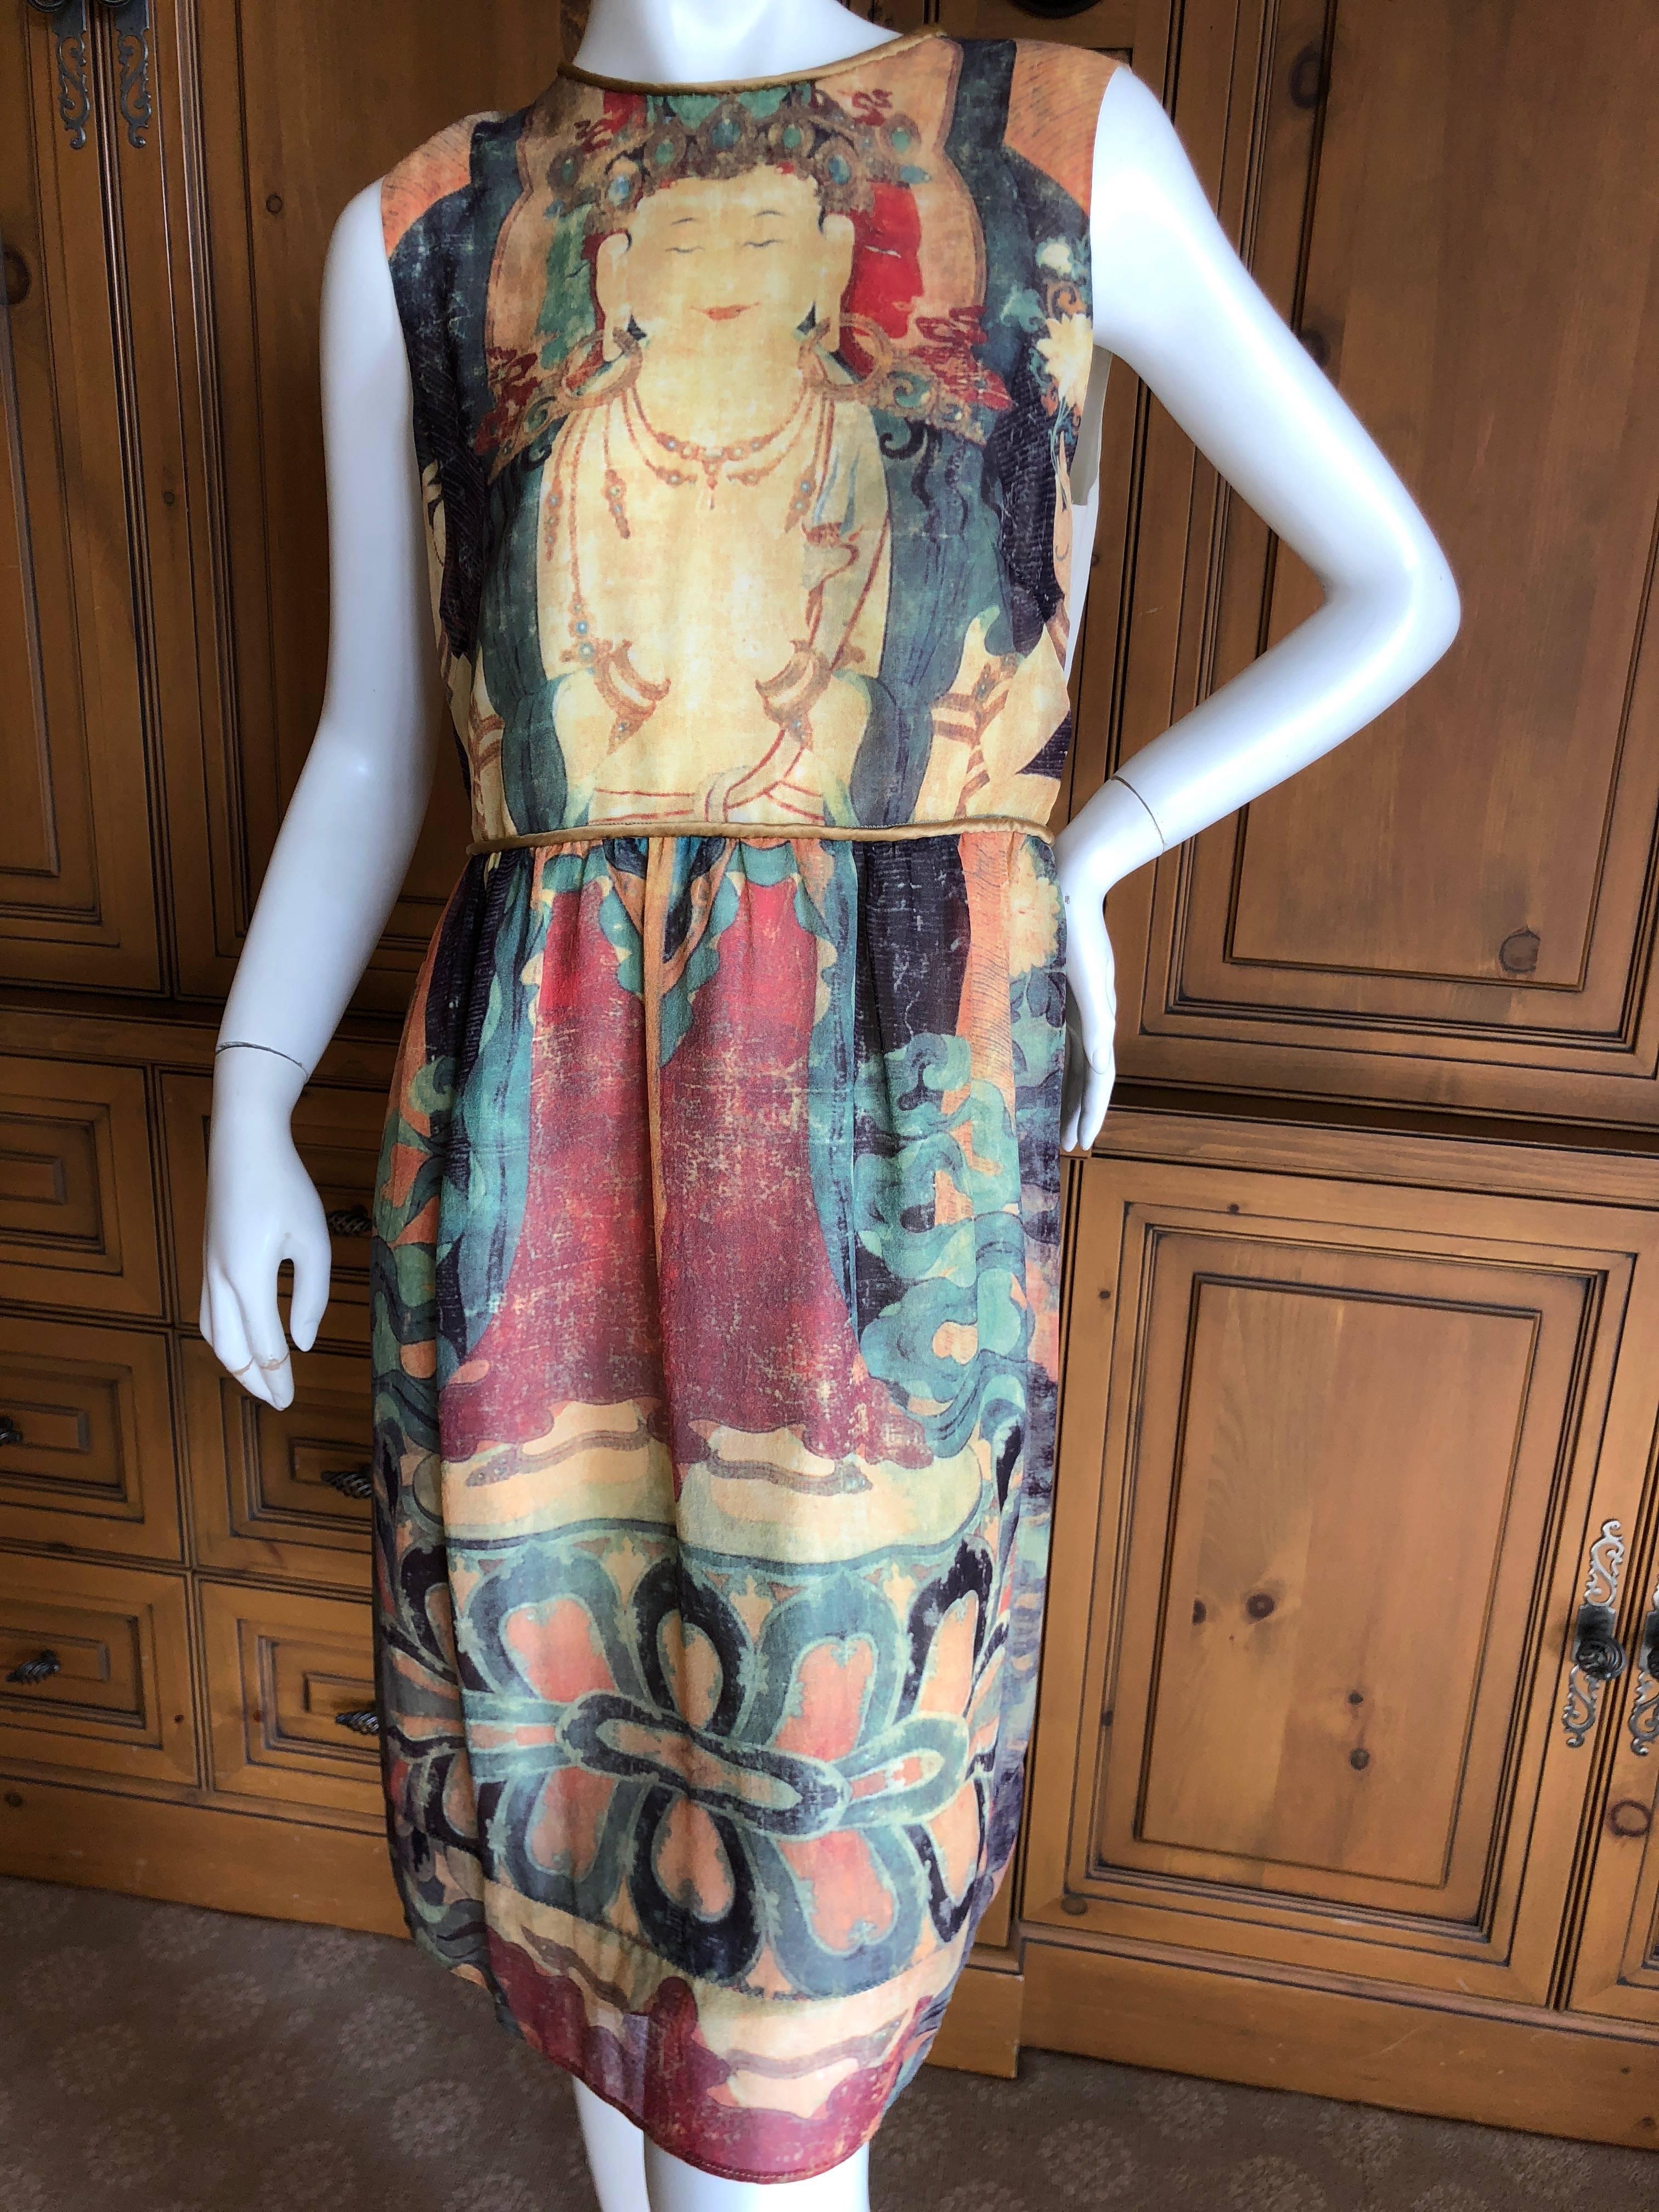 Vivienne Tam Vintage Buddha Dress
This is such a charming piece, with beautiful Cloisonné beads on the straps


Bust  38